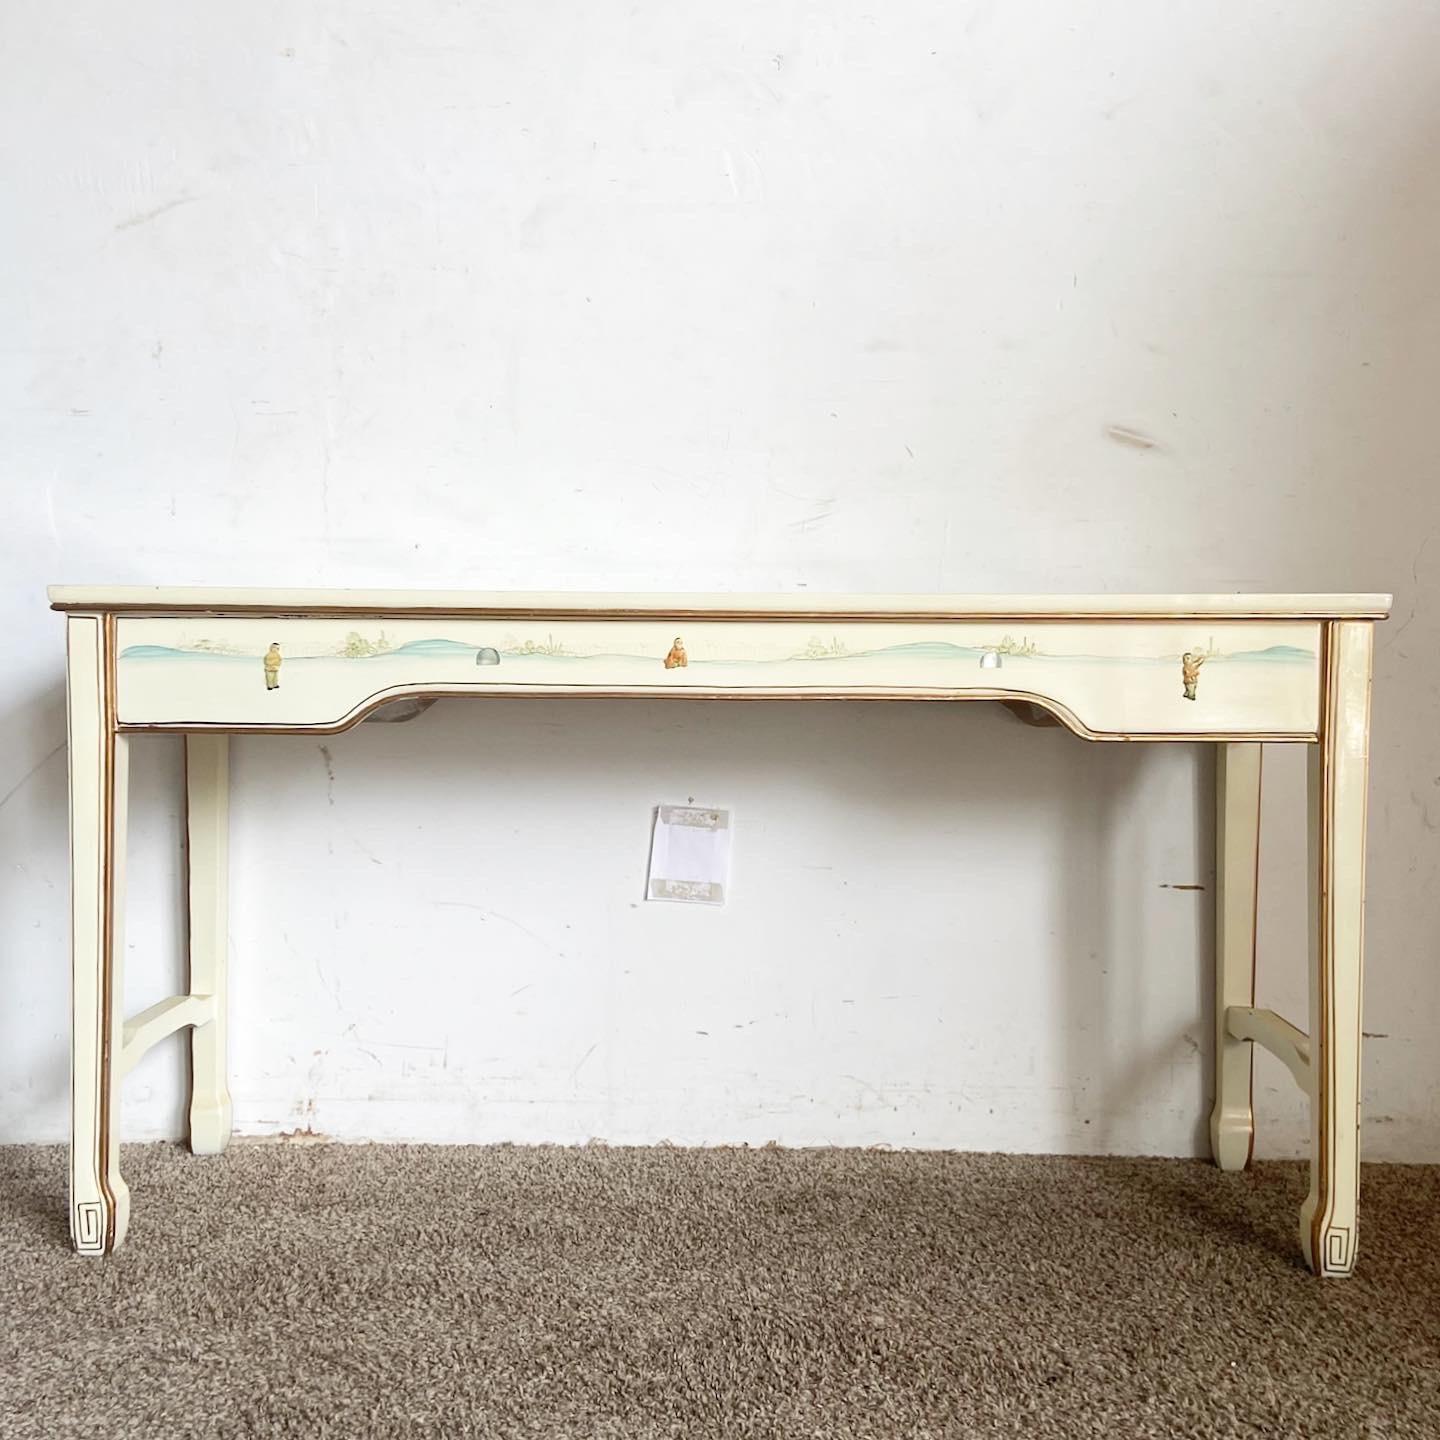 Embrace classic elegance with the Chinese Cream Lacquered and Hand Painted Console Table. Its intricate traditional motifs and soft cream finish add asian charm and sophistication to any space, perfect for entryways or living areas.
No glass top.